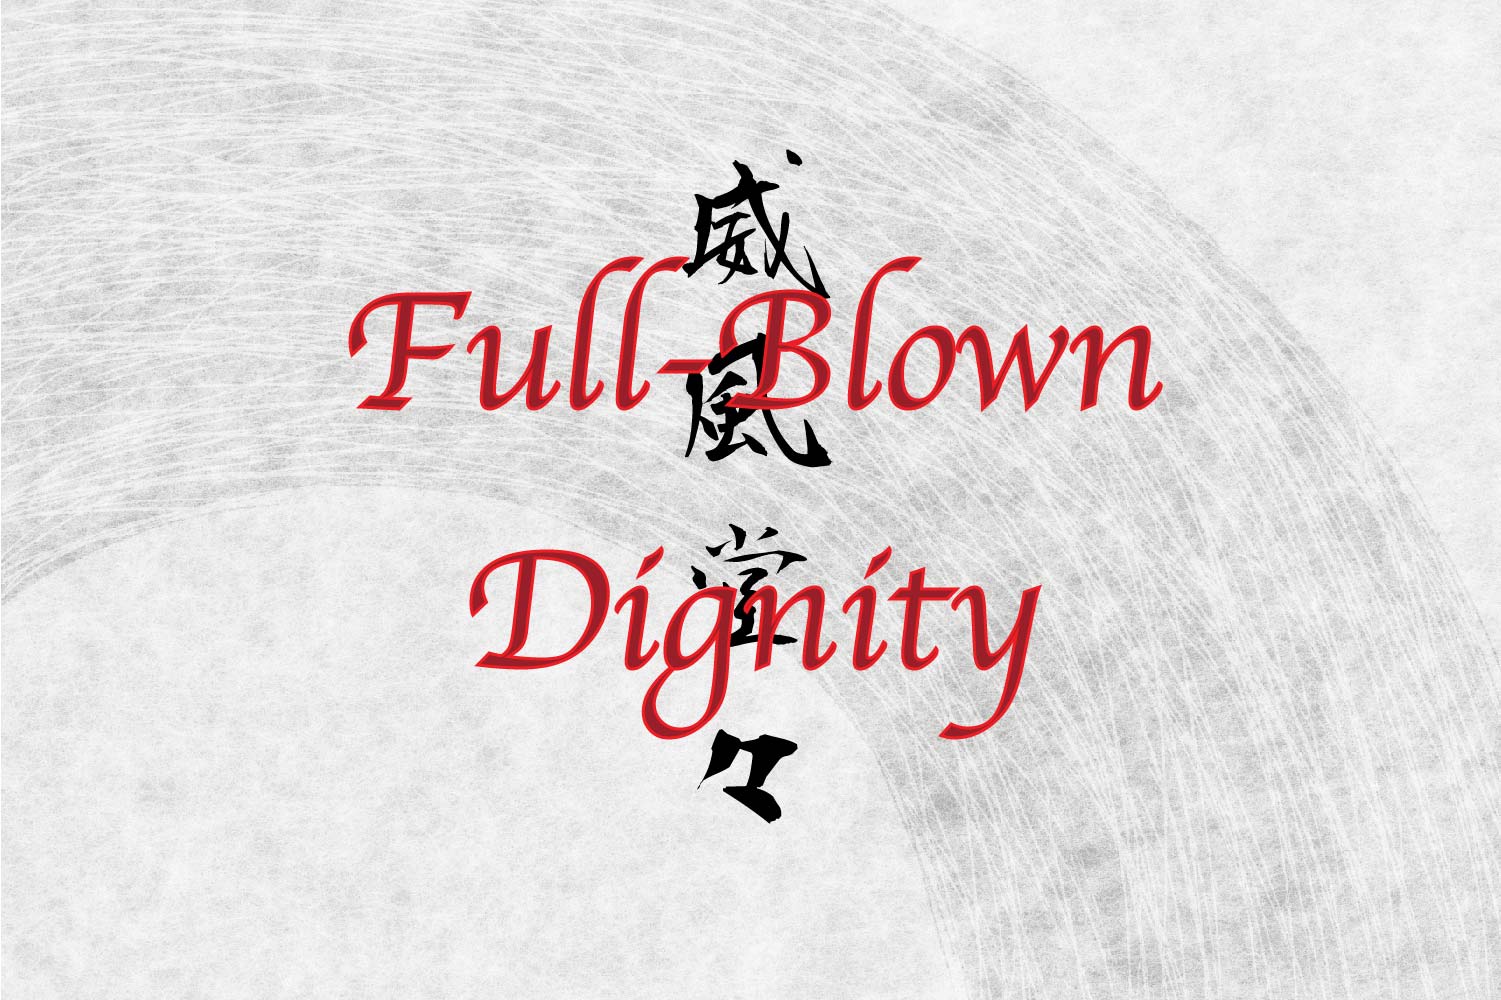 Japanese Letter Tattoo 'Stately, Full blown dignity'